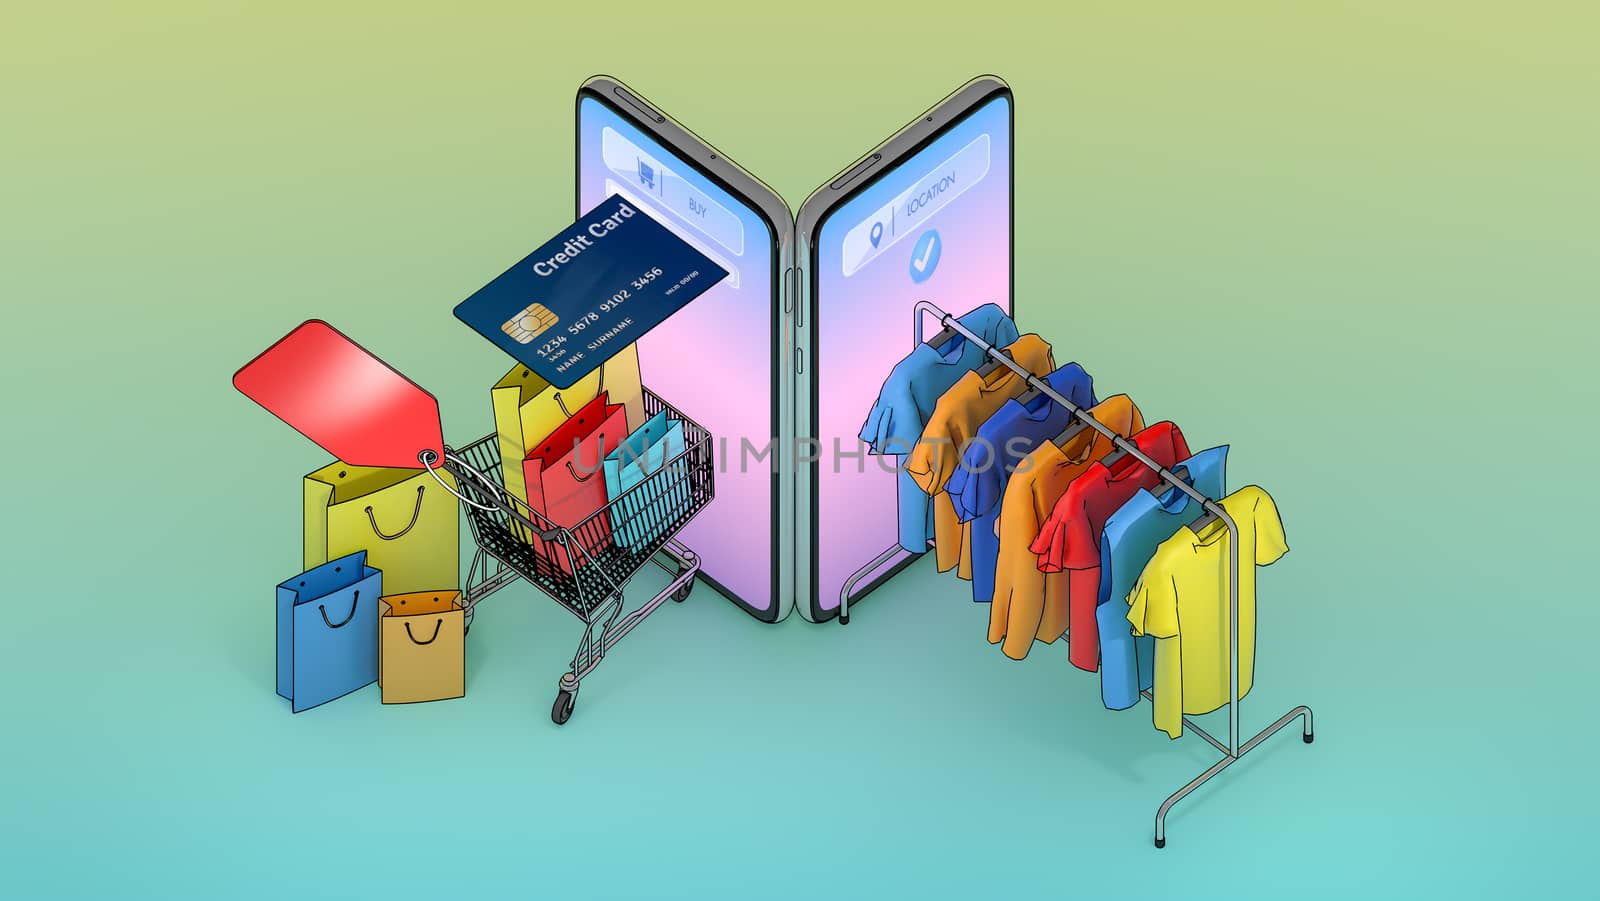 Many Shopping bag and price tag in a shopping cart and Clothes on a hanger appeared from smartphones screen., shopping online or shopaholic concept.,3d illustration with object clipping path. by anotestocker